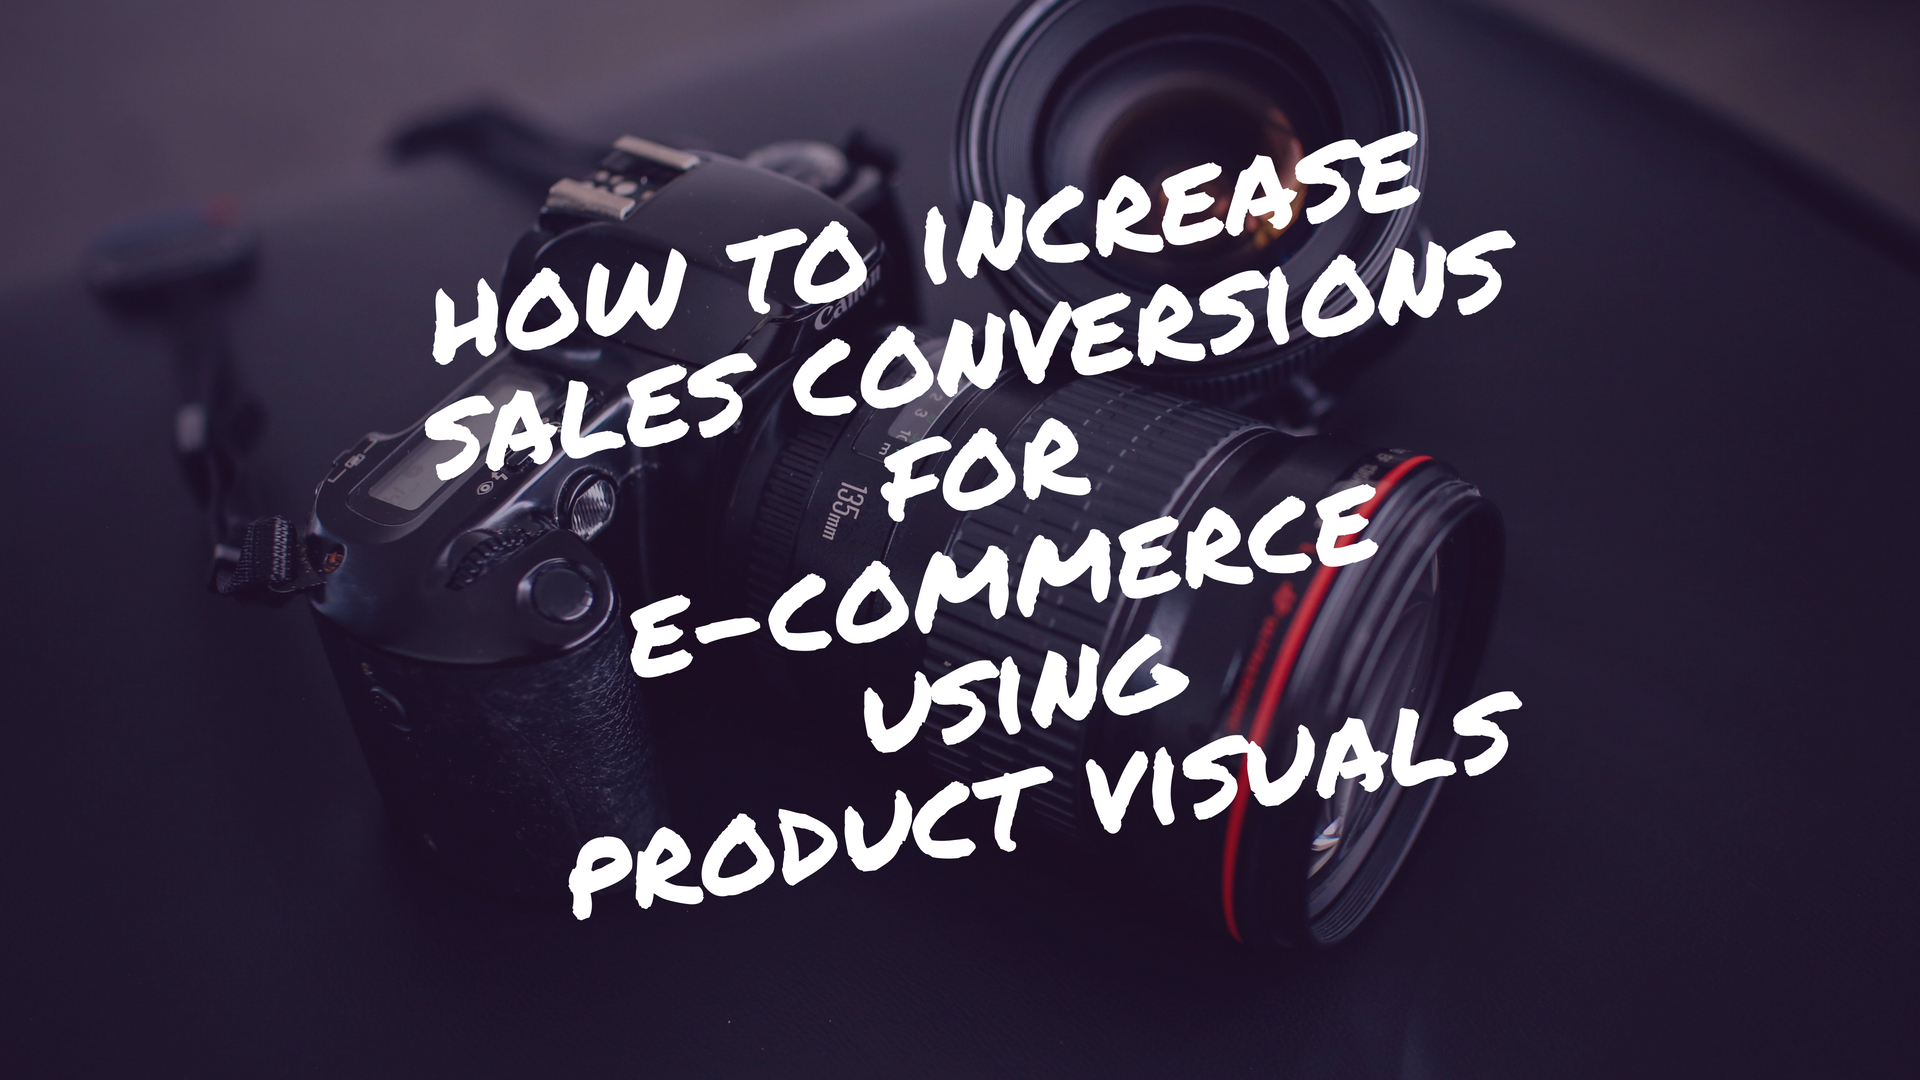 How to Increase Sales Conversions for E-commerce Using Product Visuals